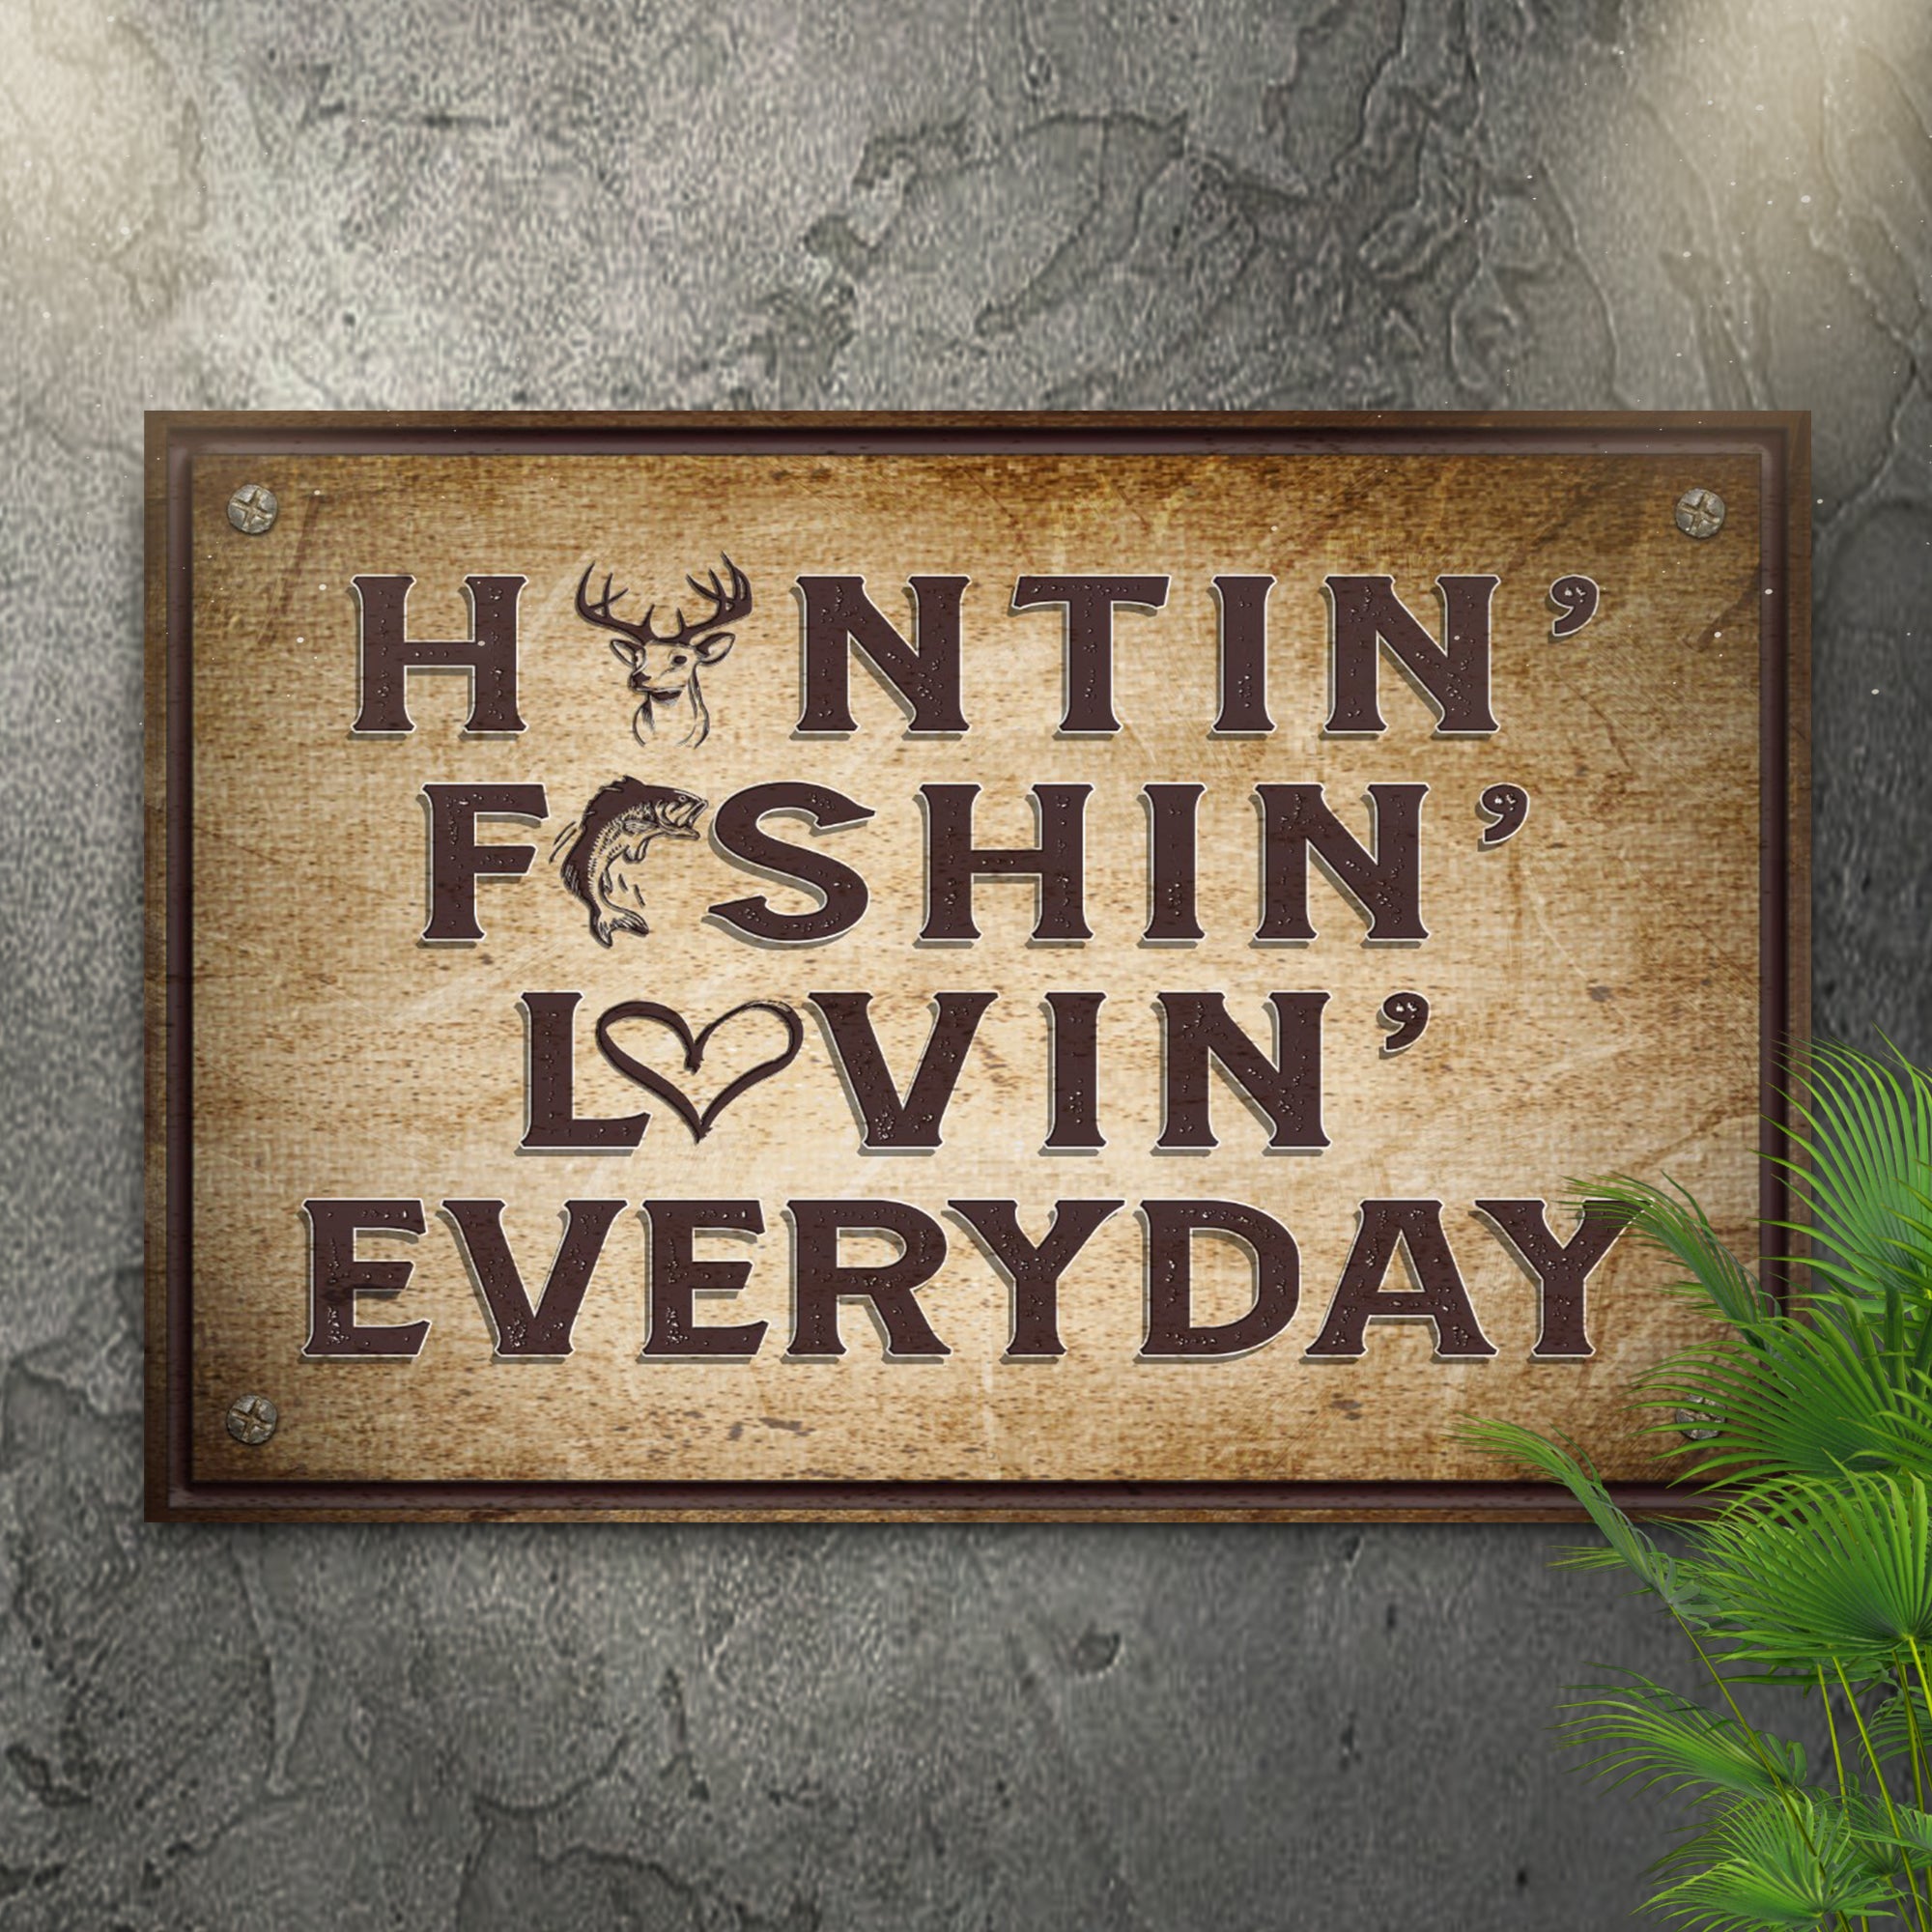 Hunting Fishing Loving Everyday Sign – Tailored Canvases